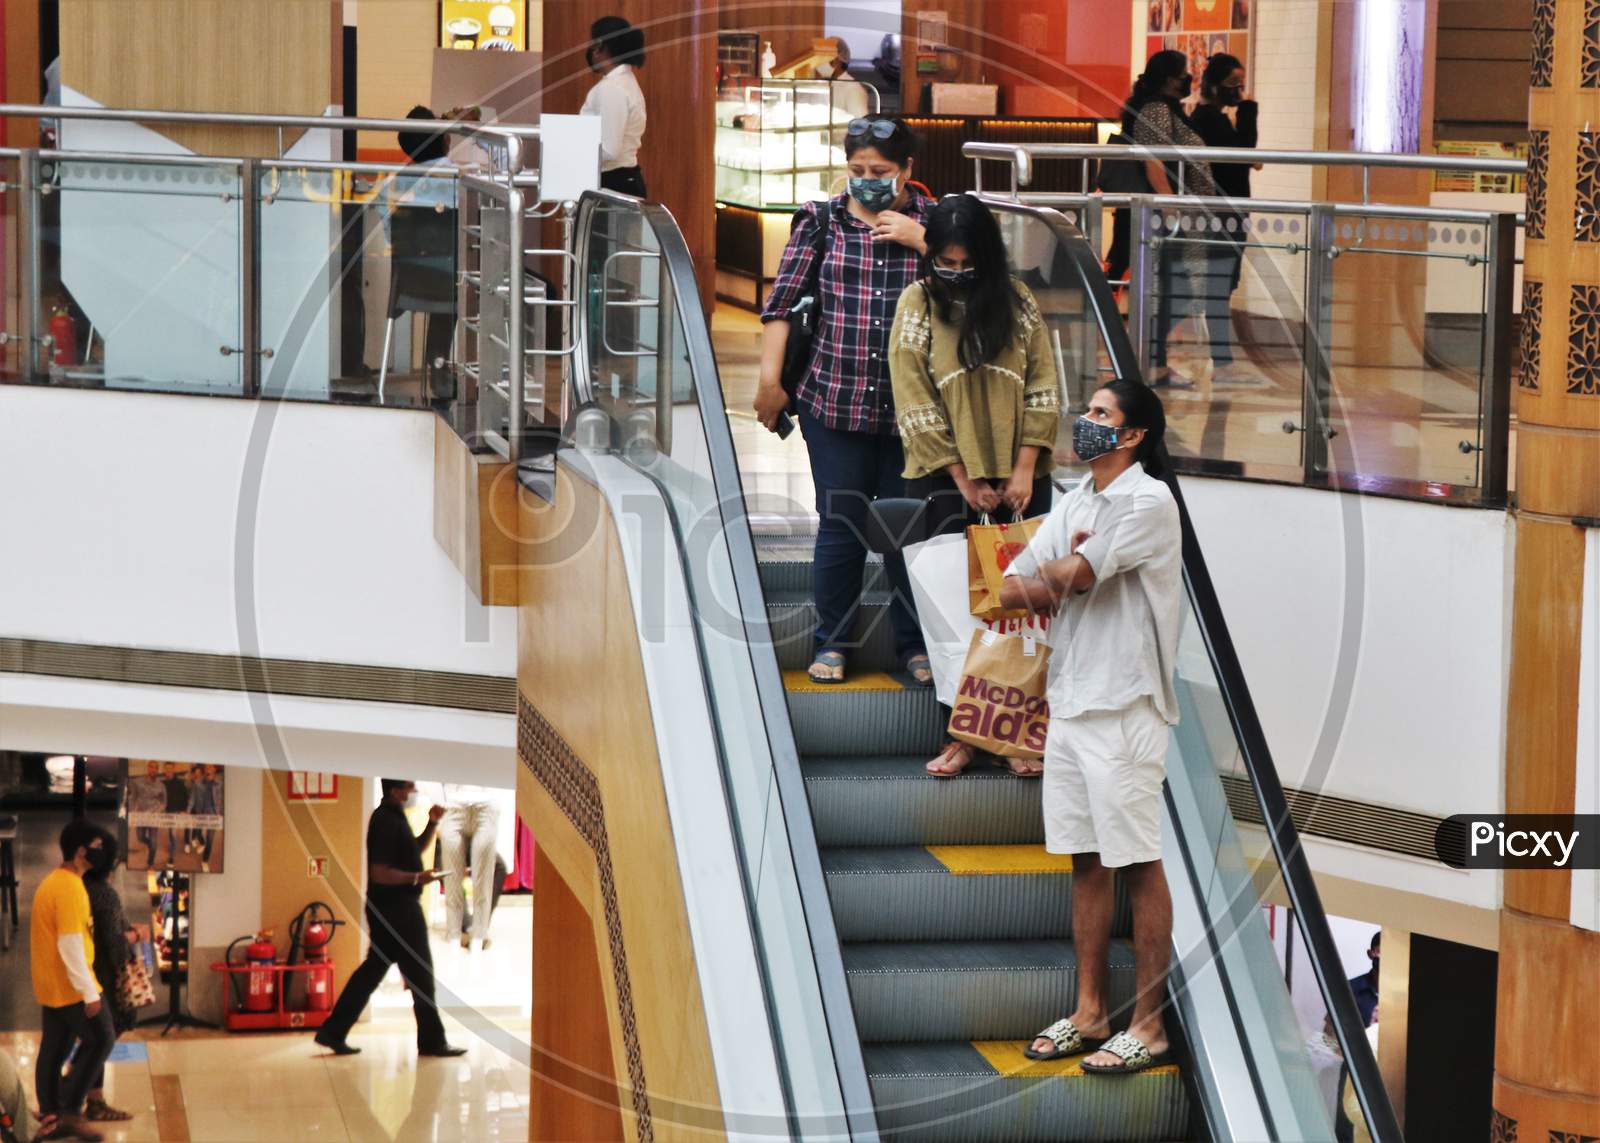 People are seen at a shopping mall amidst the spread of the coronavirus disease (COVID-19) in Mumbai, India on October 13, 2020.